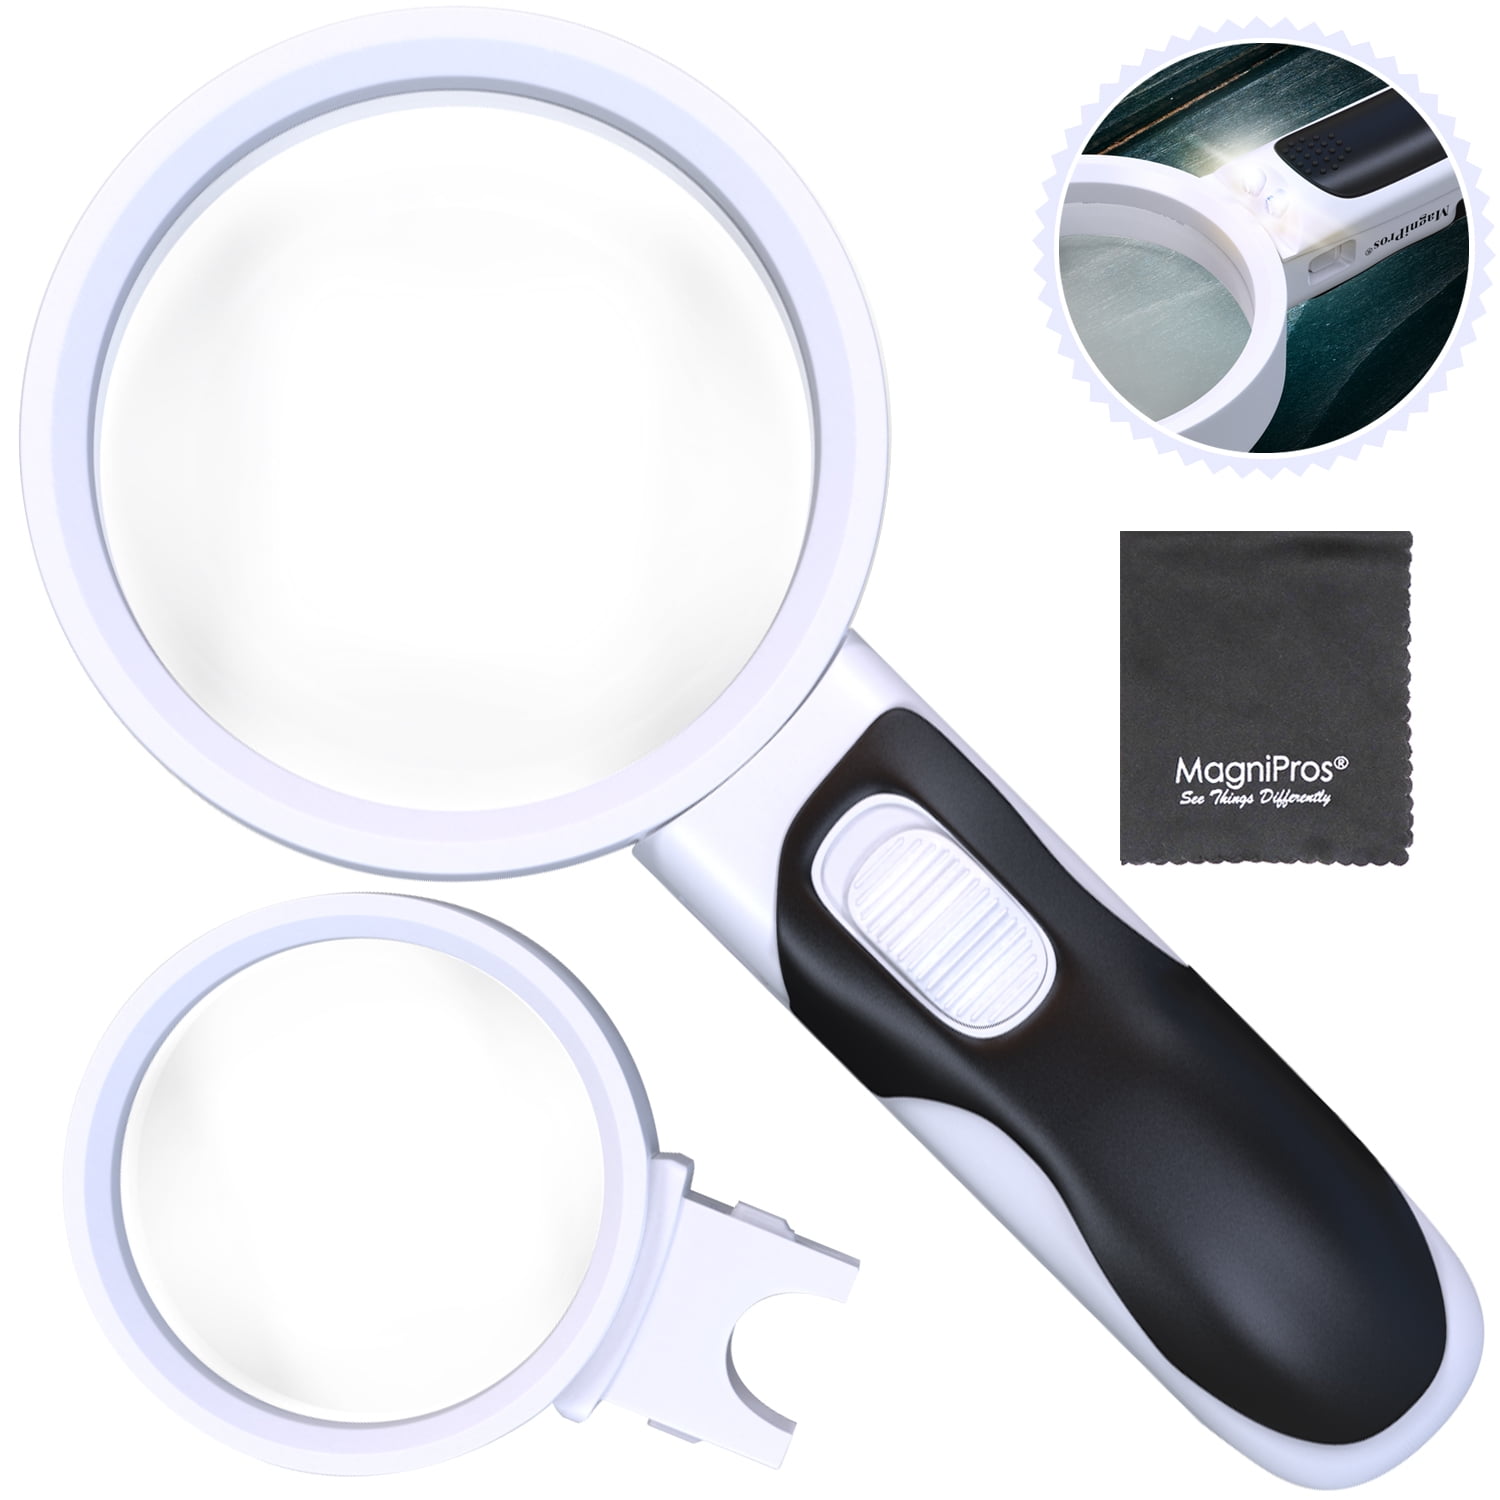 10X Handheld Magnifying Map Magnifier Loupe Glass Reading With 12 LED Lights 